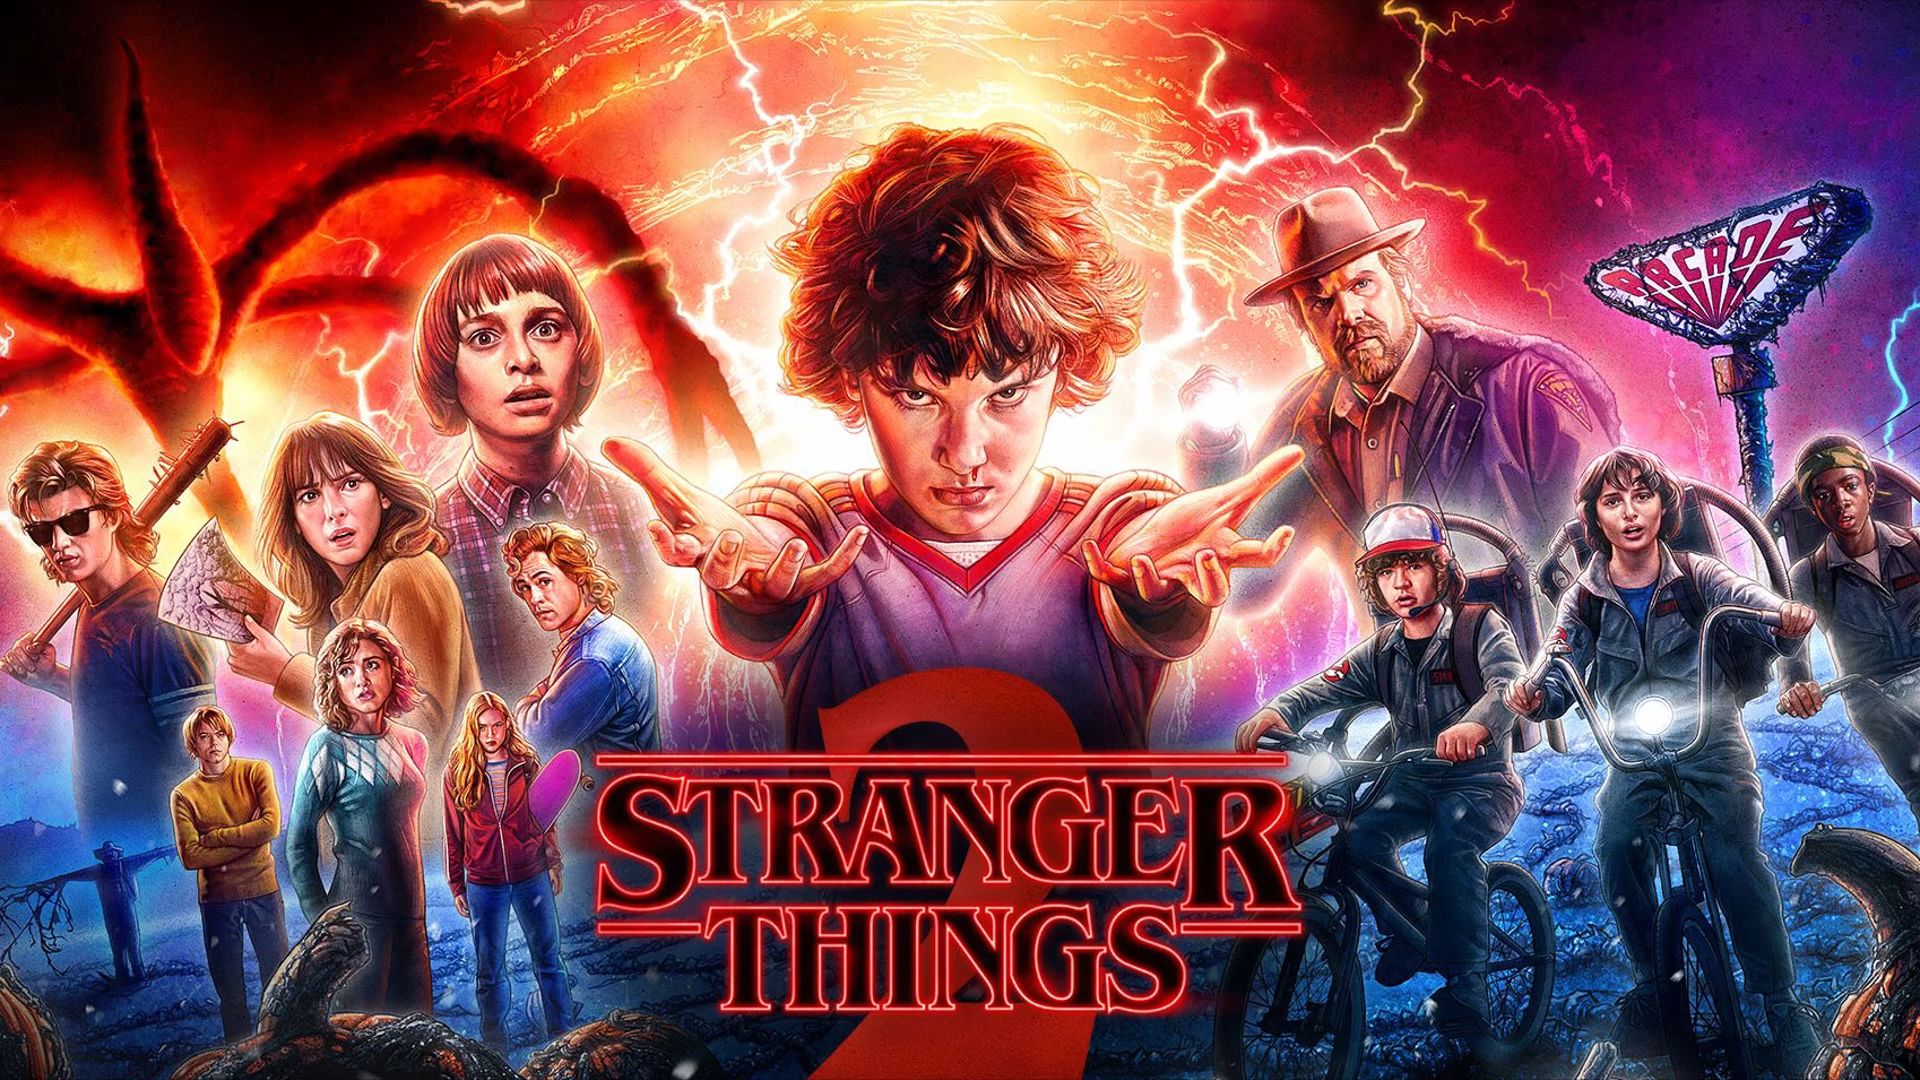 800x1280 2022 Stranger Things Season 4 5k Nexus 7Samsung Galaxy Tab  10Note Android Tablets HD 4k Wallpapers Images Backgrounds Photos and  Pictures